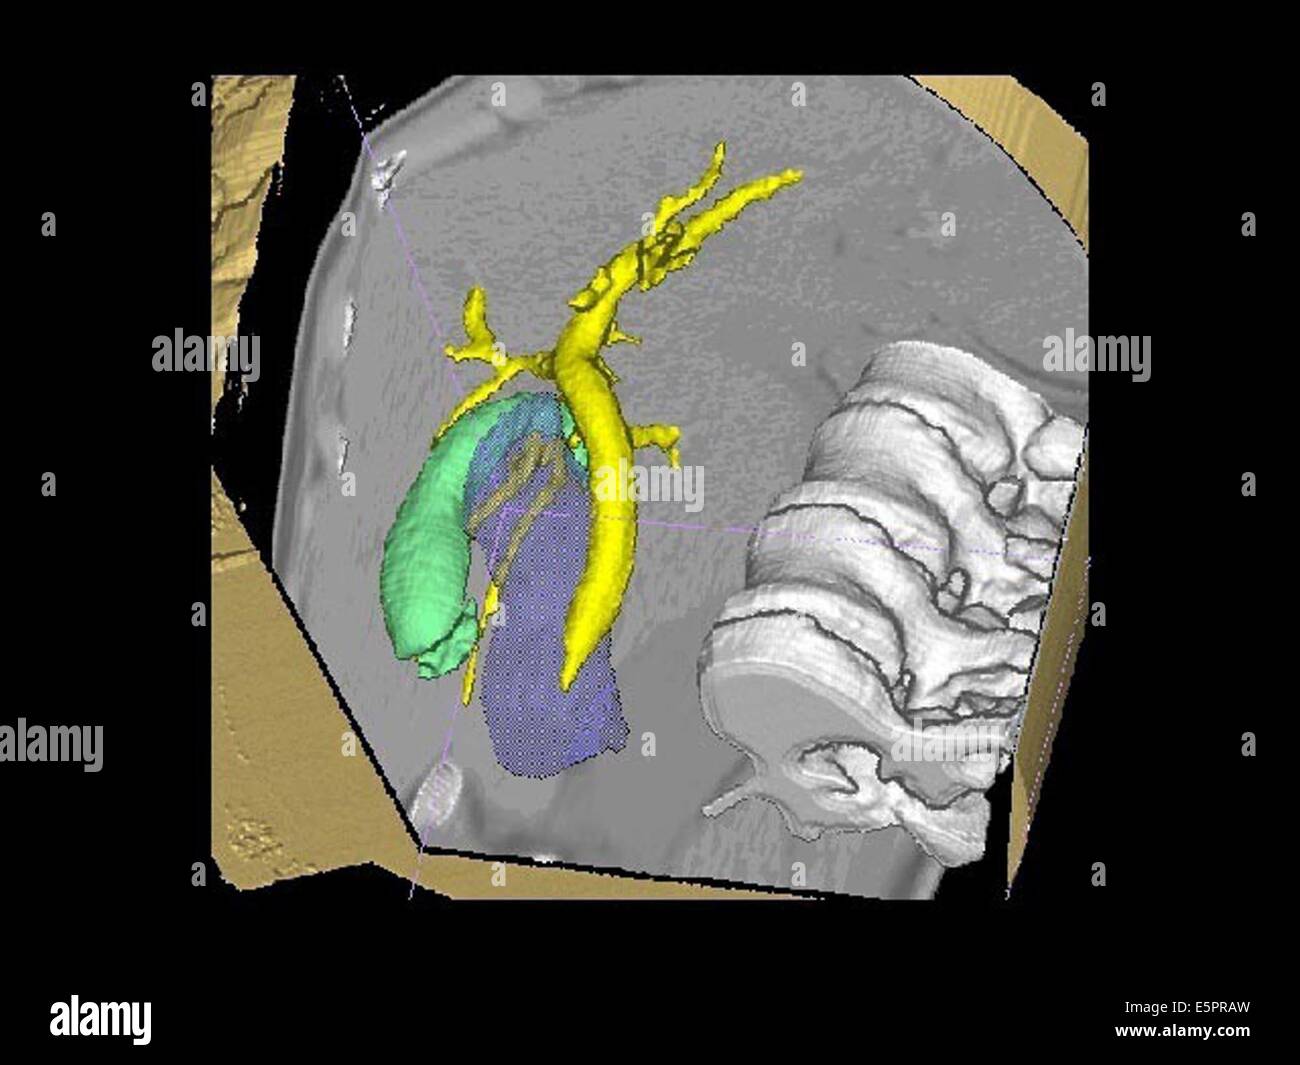 Three-dimensional computed tomographic (CT) scan reconstruction of the bile duct (yellow) and gall bladder (green) seen from Stock Photo